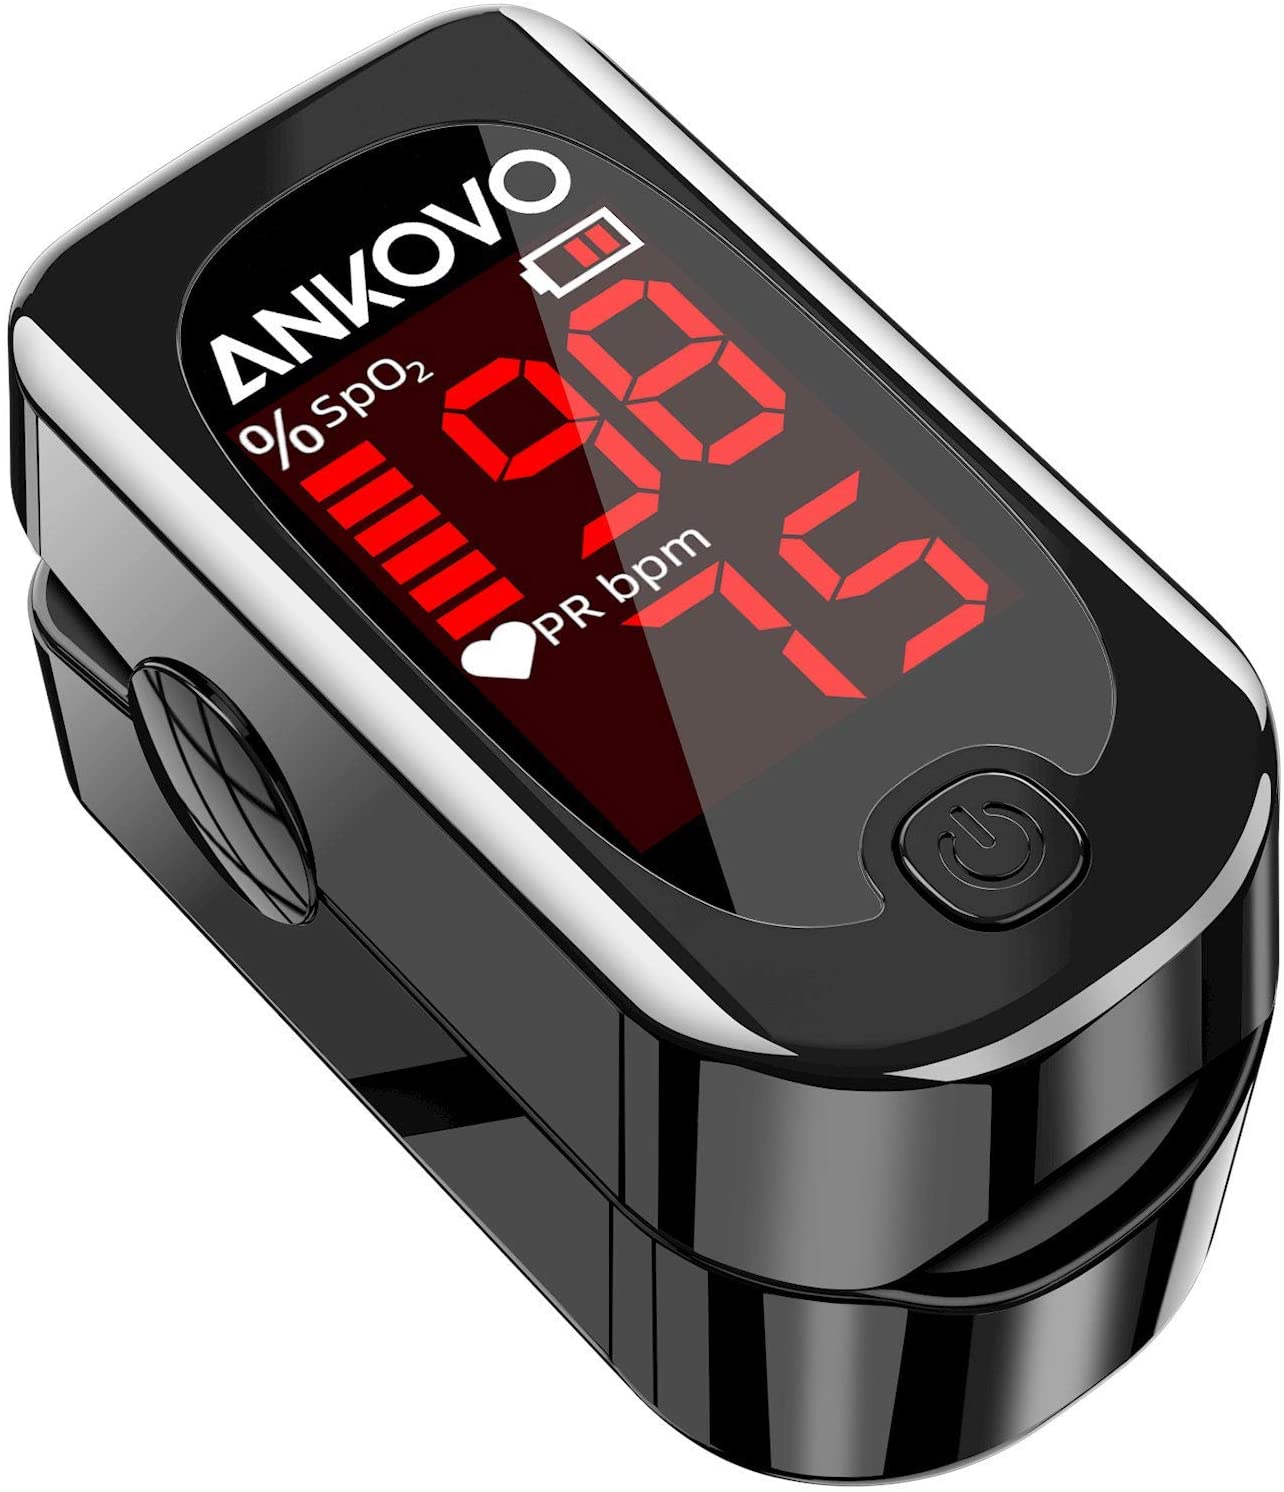 ANKOVO Blood Oxygen Saturation Monitor with Pulse Rate $9.47